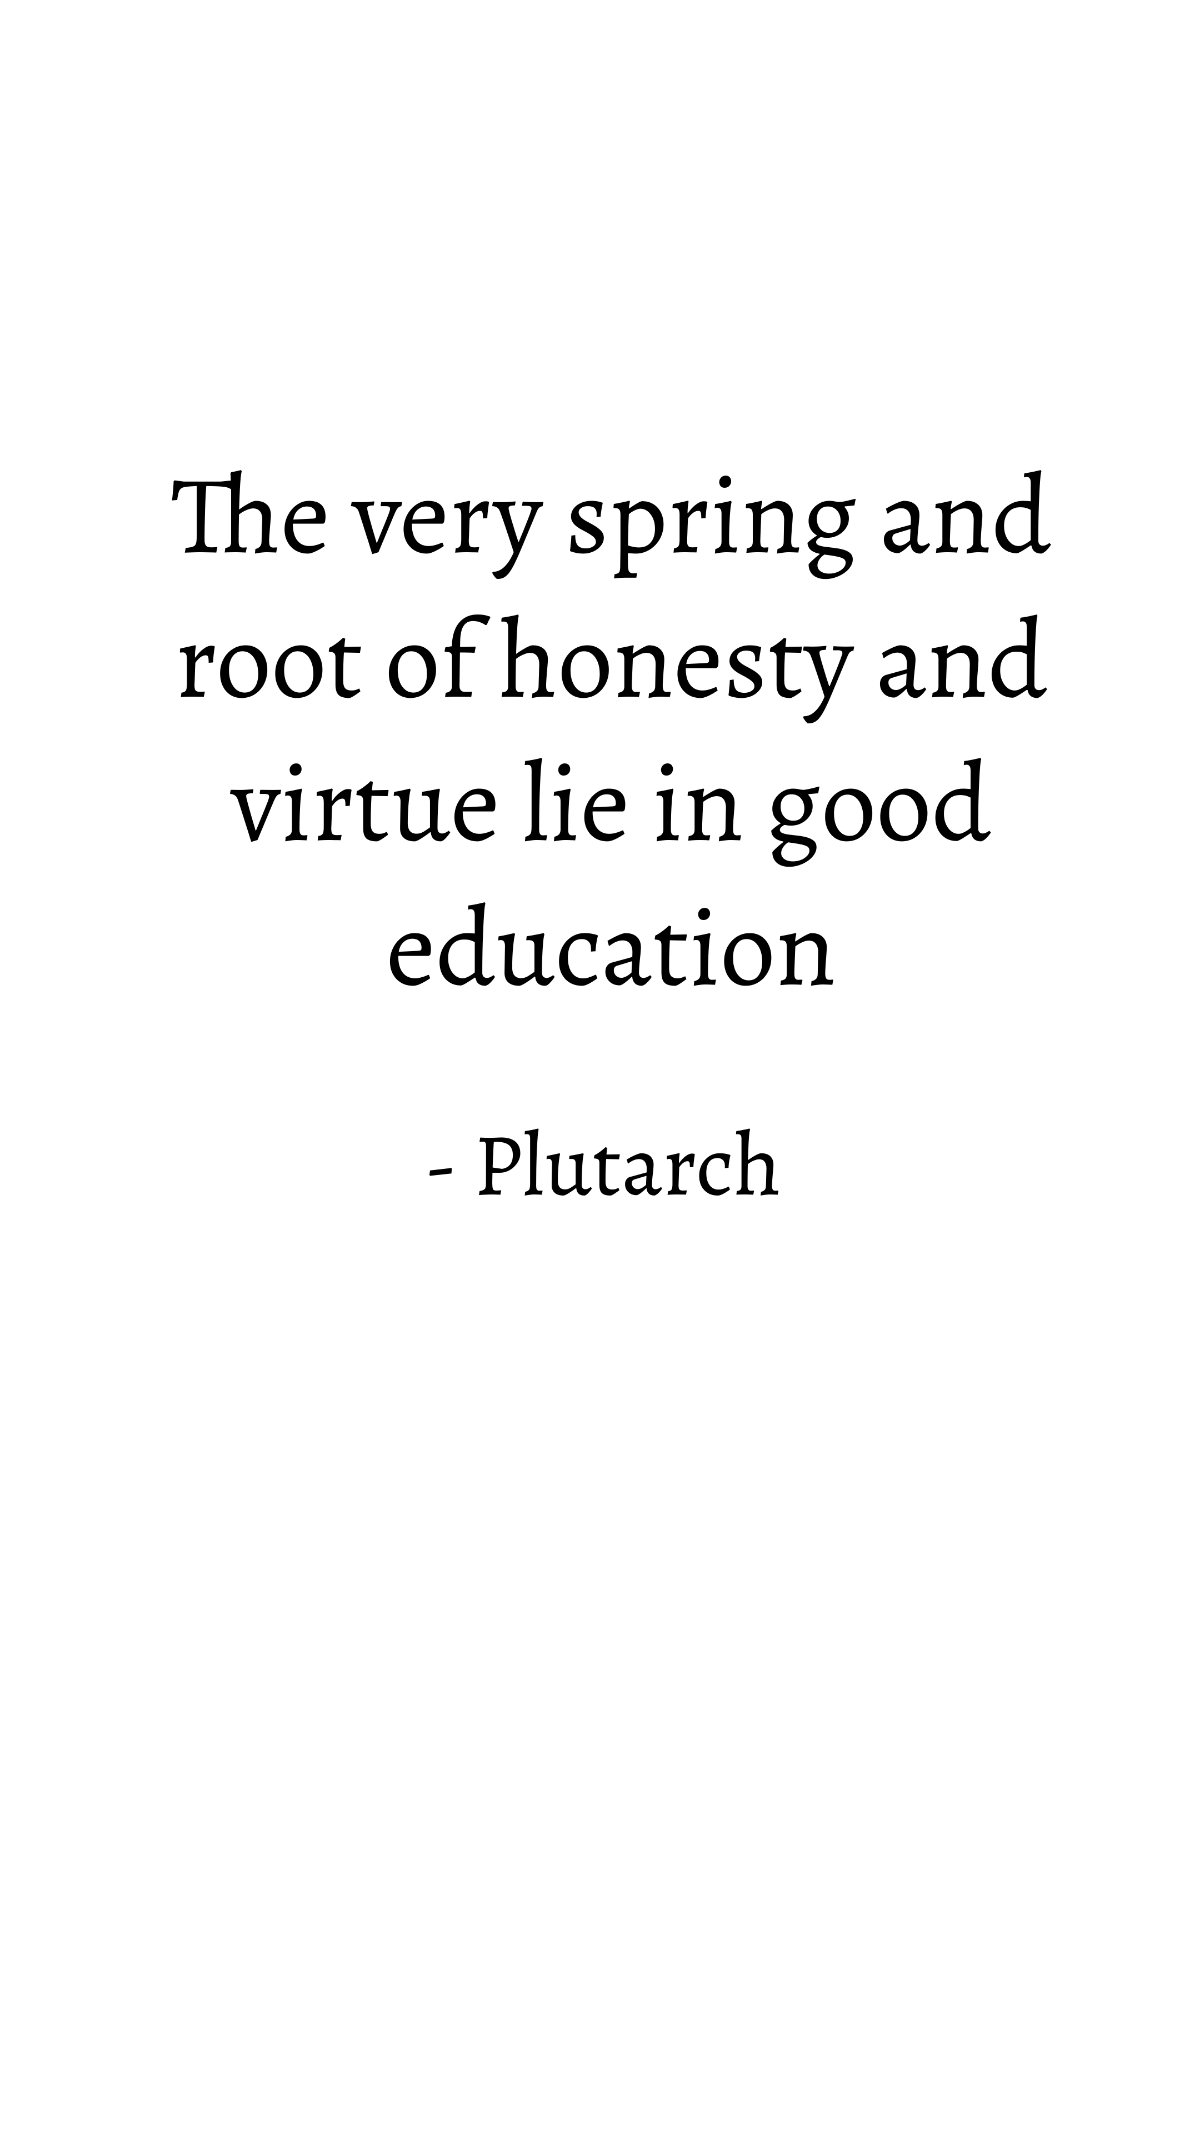 Free Plutarch - The very spring and root of honesty and virtue lie in good education Template